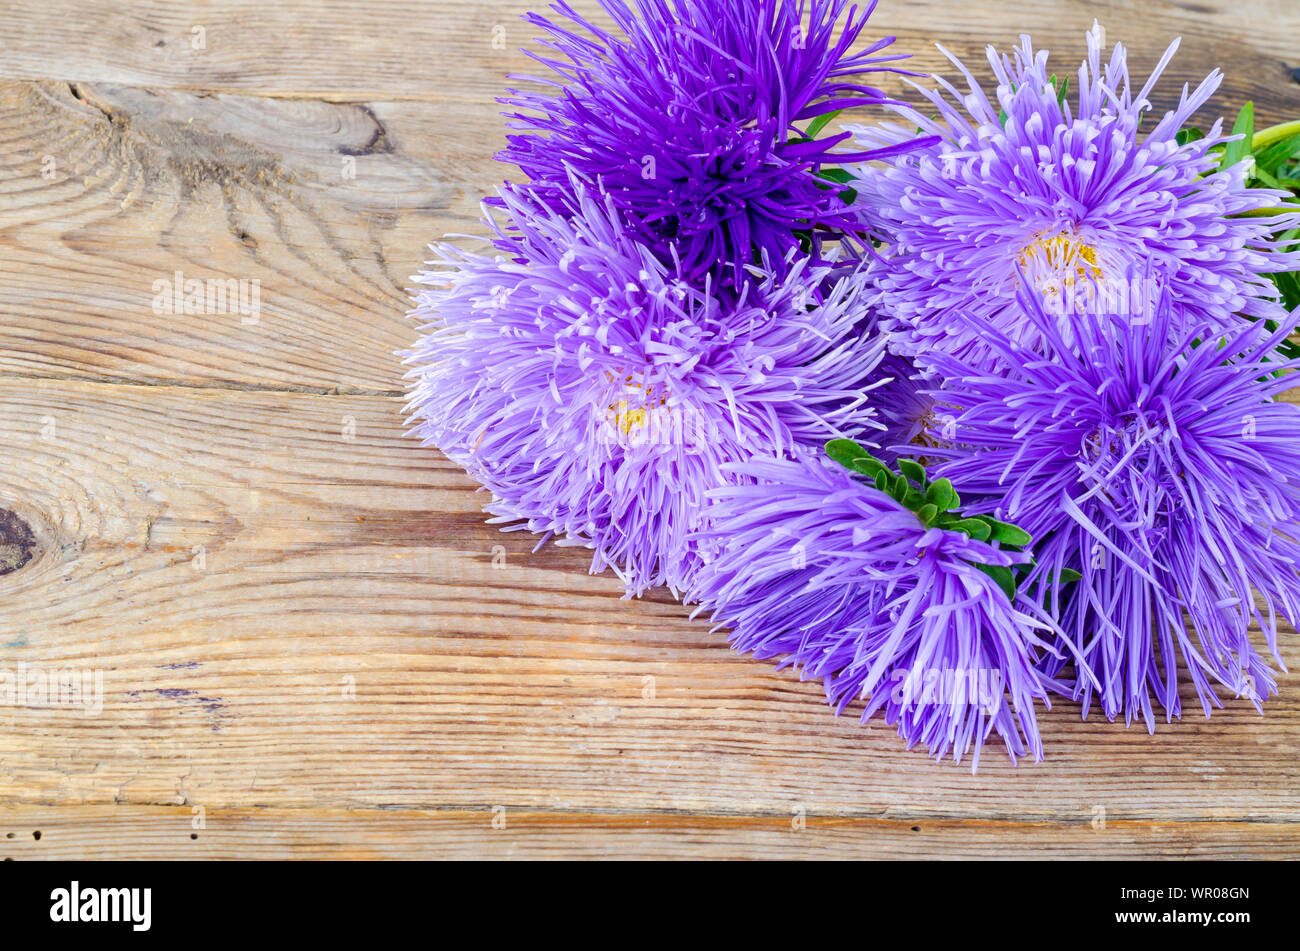 Autumn aster flowers multicolored on wooden background Stock Photo